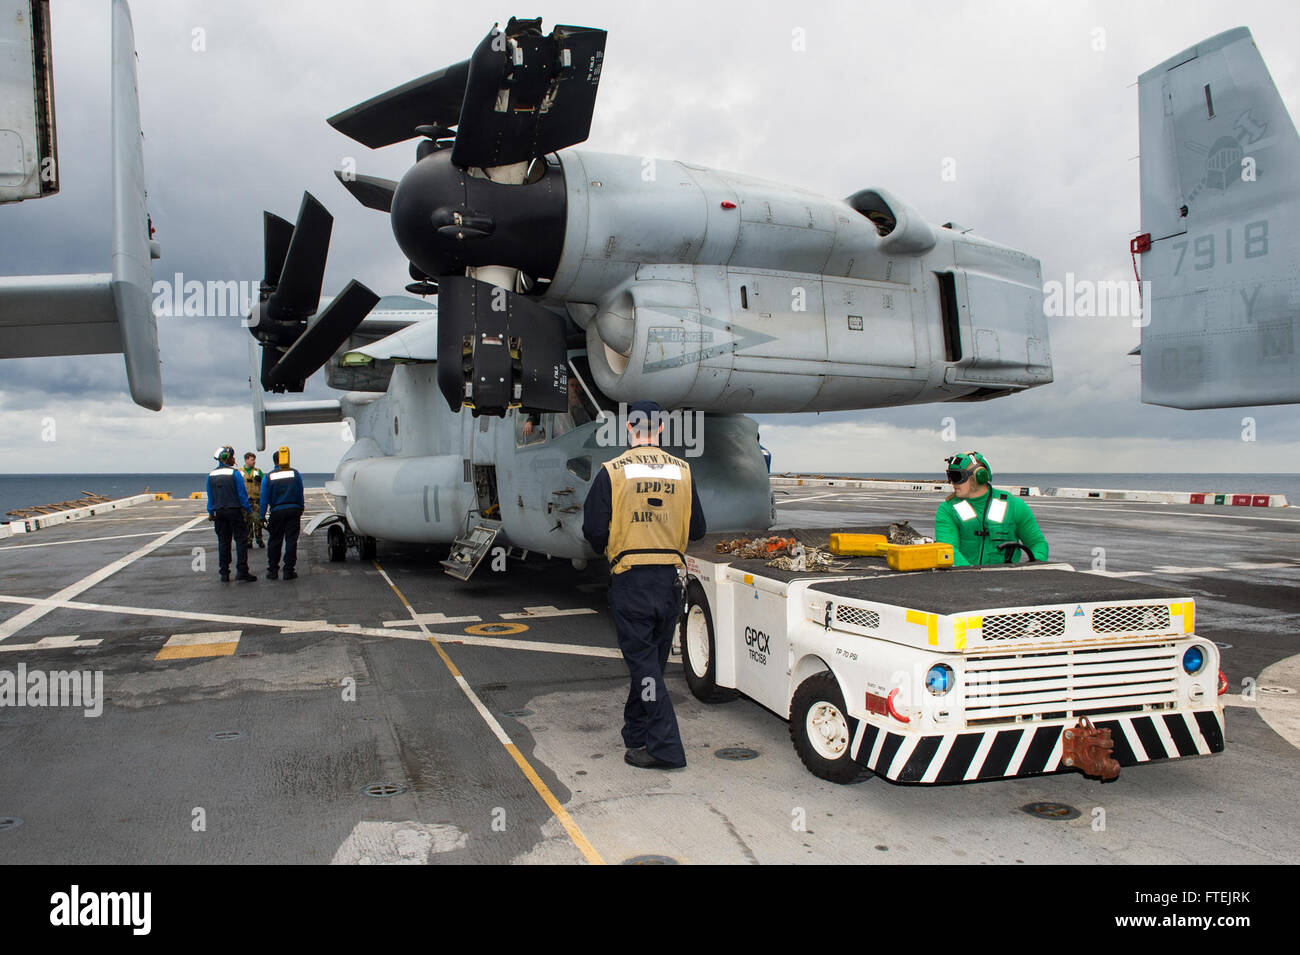 MEDITERRANEAN SEA (Dec. 27, 2014) Sailors aboard the San Antonio-class amphibious transport dock ship USS New York (LPD 21) reposition an MV-22B Osprey on the flight deck in preparation for flight operations Dec. 26, 2014. New York, part of the Iwo Jima Amphibious Ready Group/24th Marine Expeditionary Unit, is conducting naval operations in the U.S. 6th Fleet area of operations in support of U.S. national security interests in Europe Stock Photo